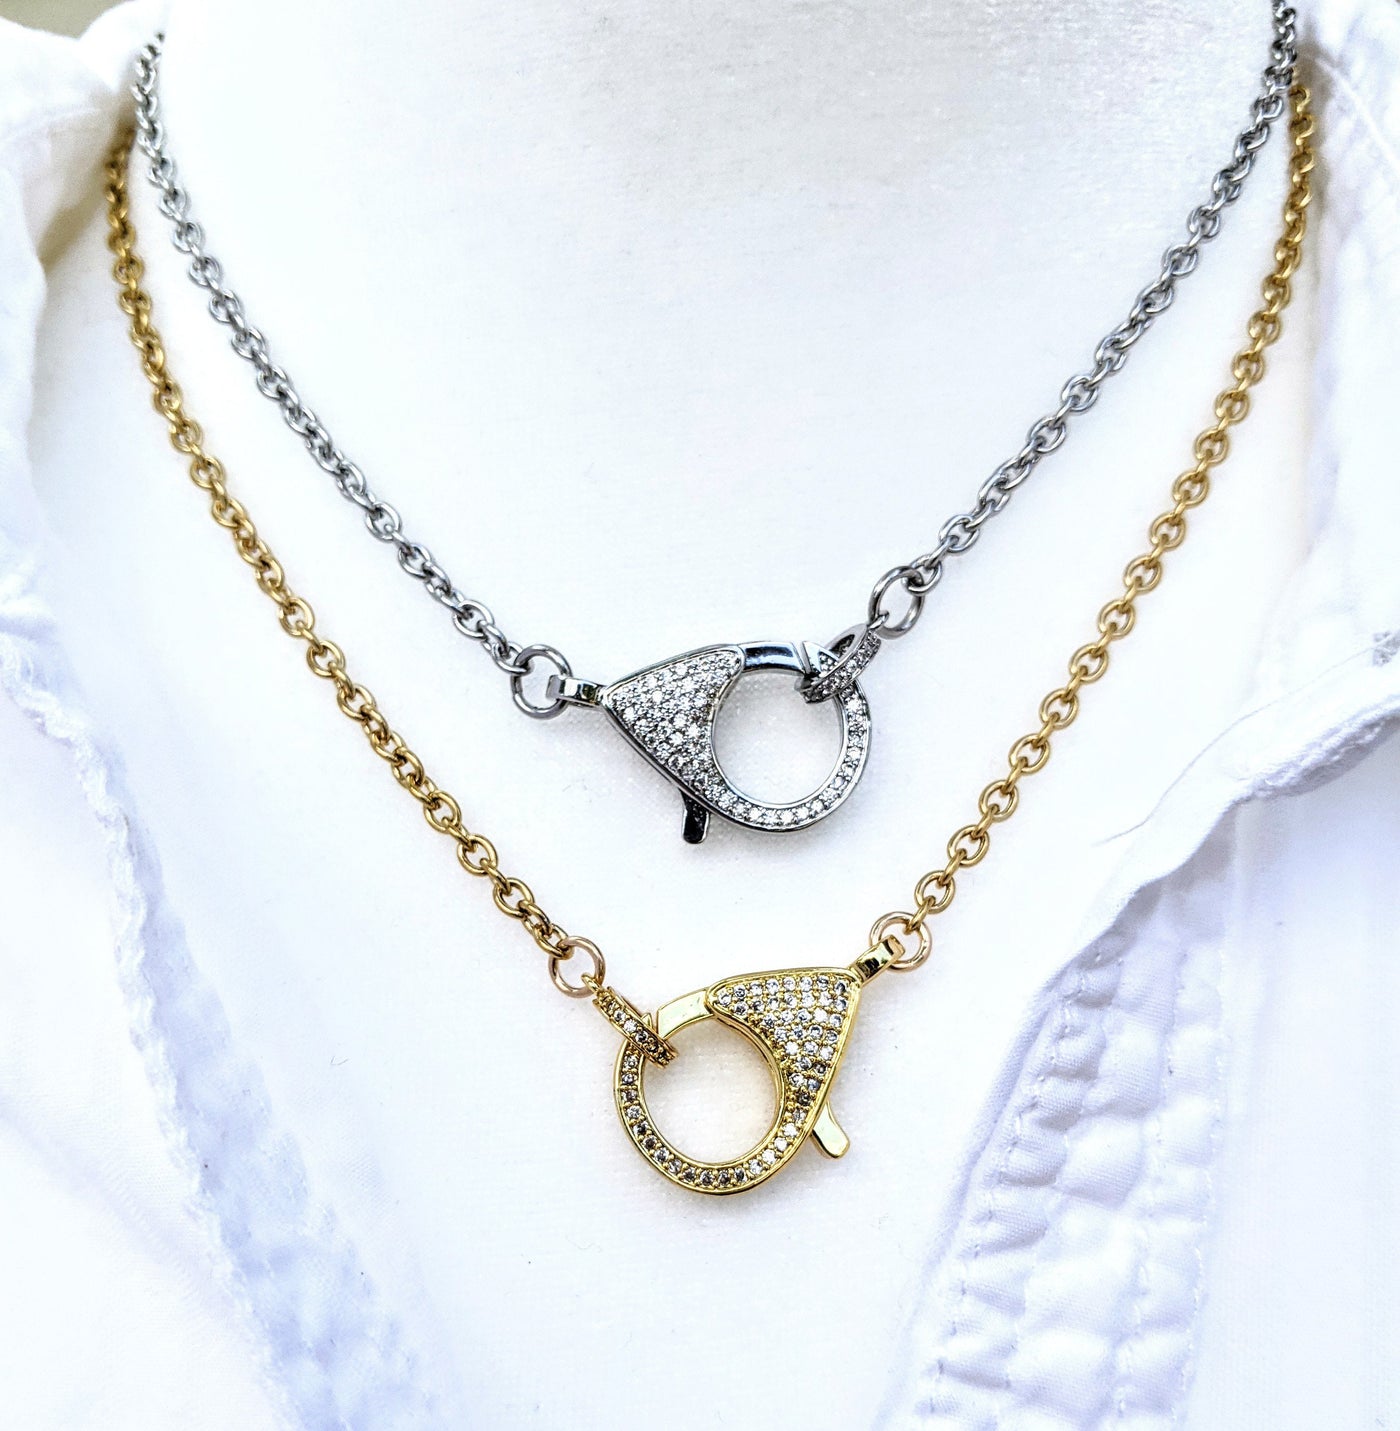 Pave Lobster Claw Necklace